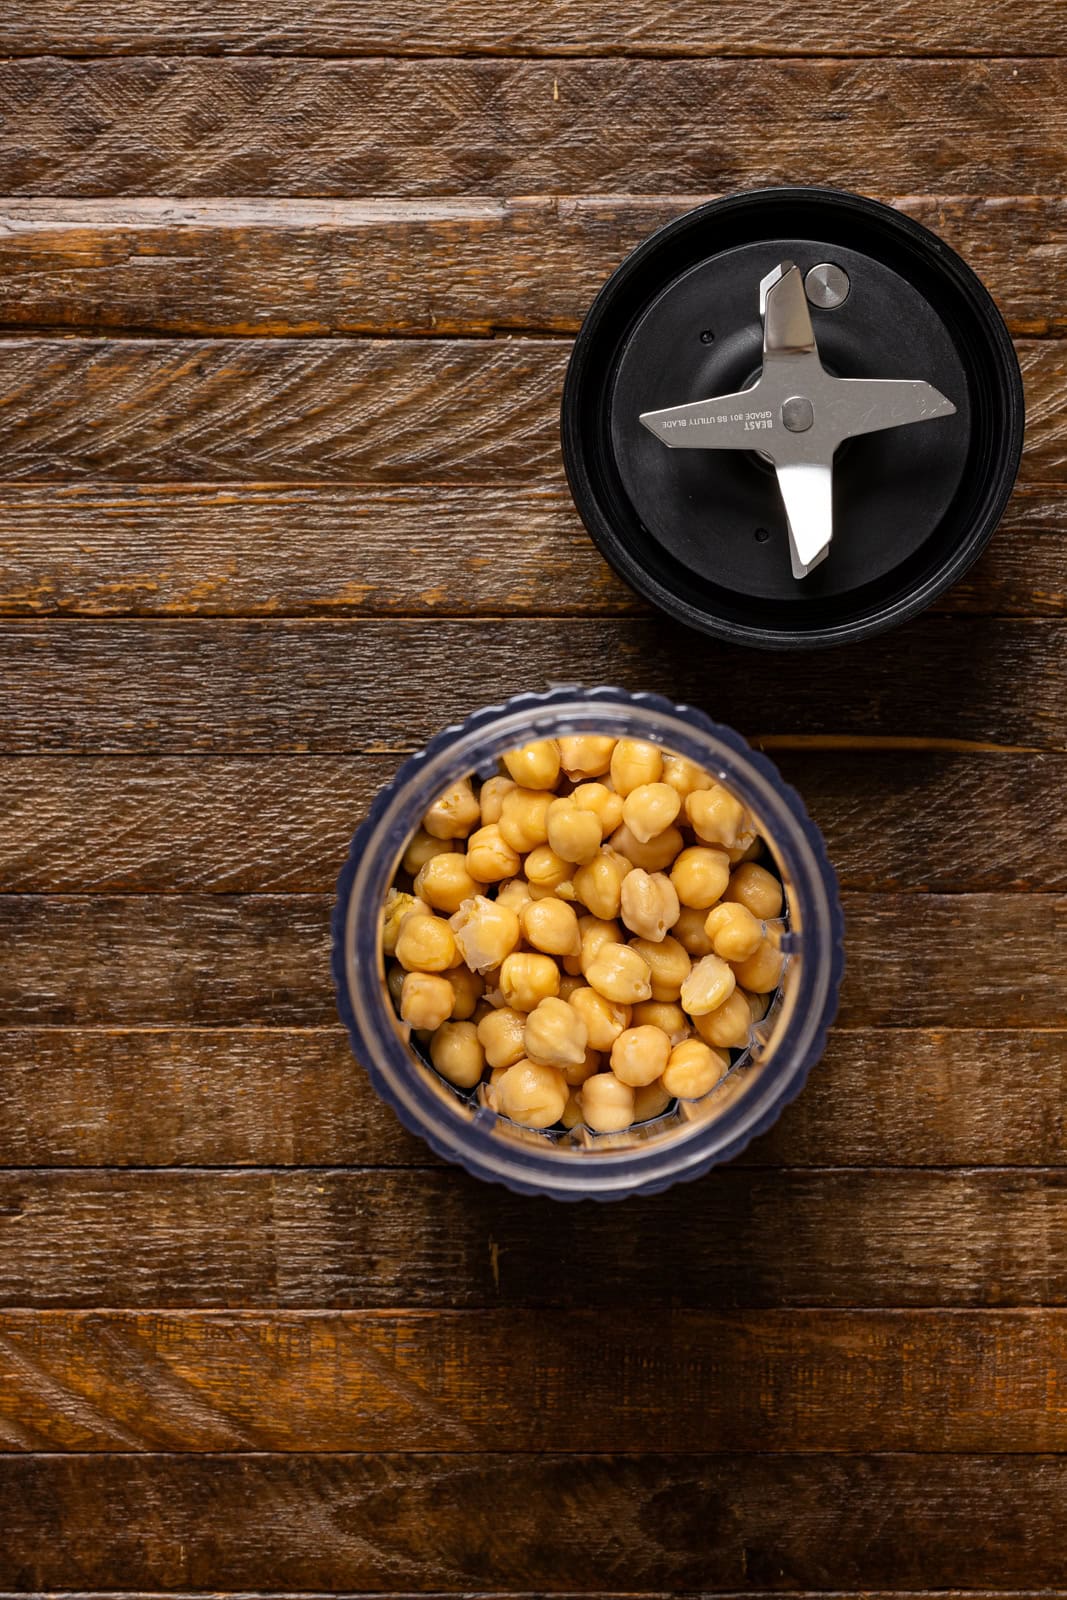 Chickpeas and ingredients in a blender on a brown wood table.